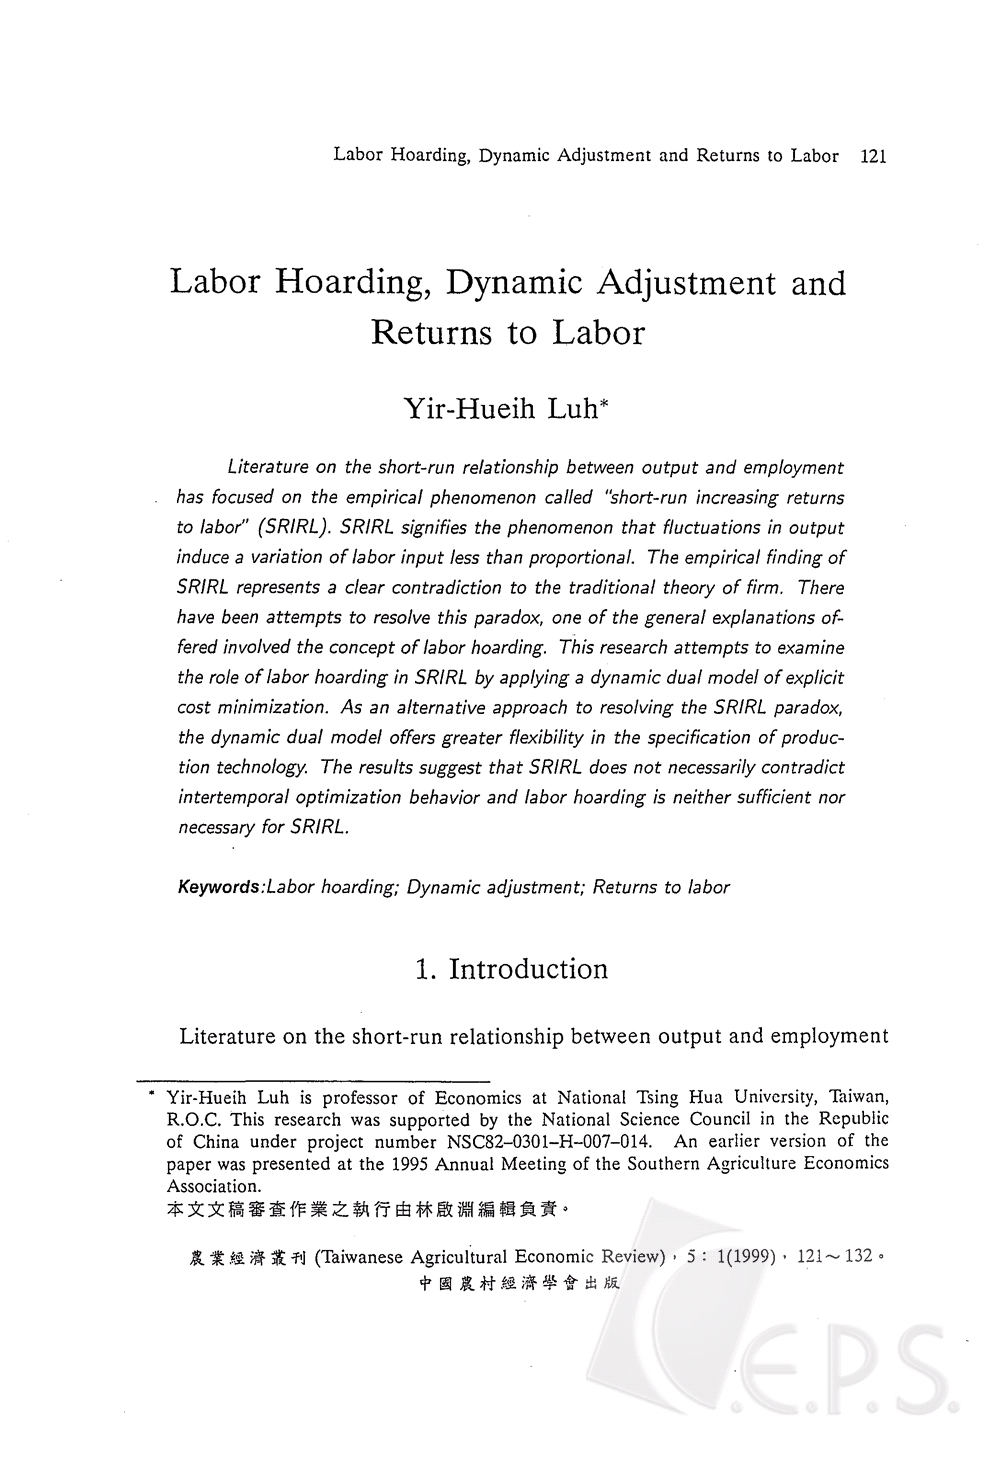 Labor_Hoarging__Dynamic_Adjustment_and_Returns_to_Labor.jpg